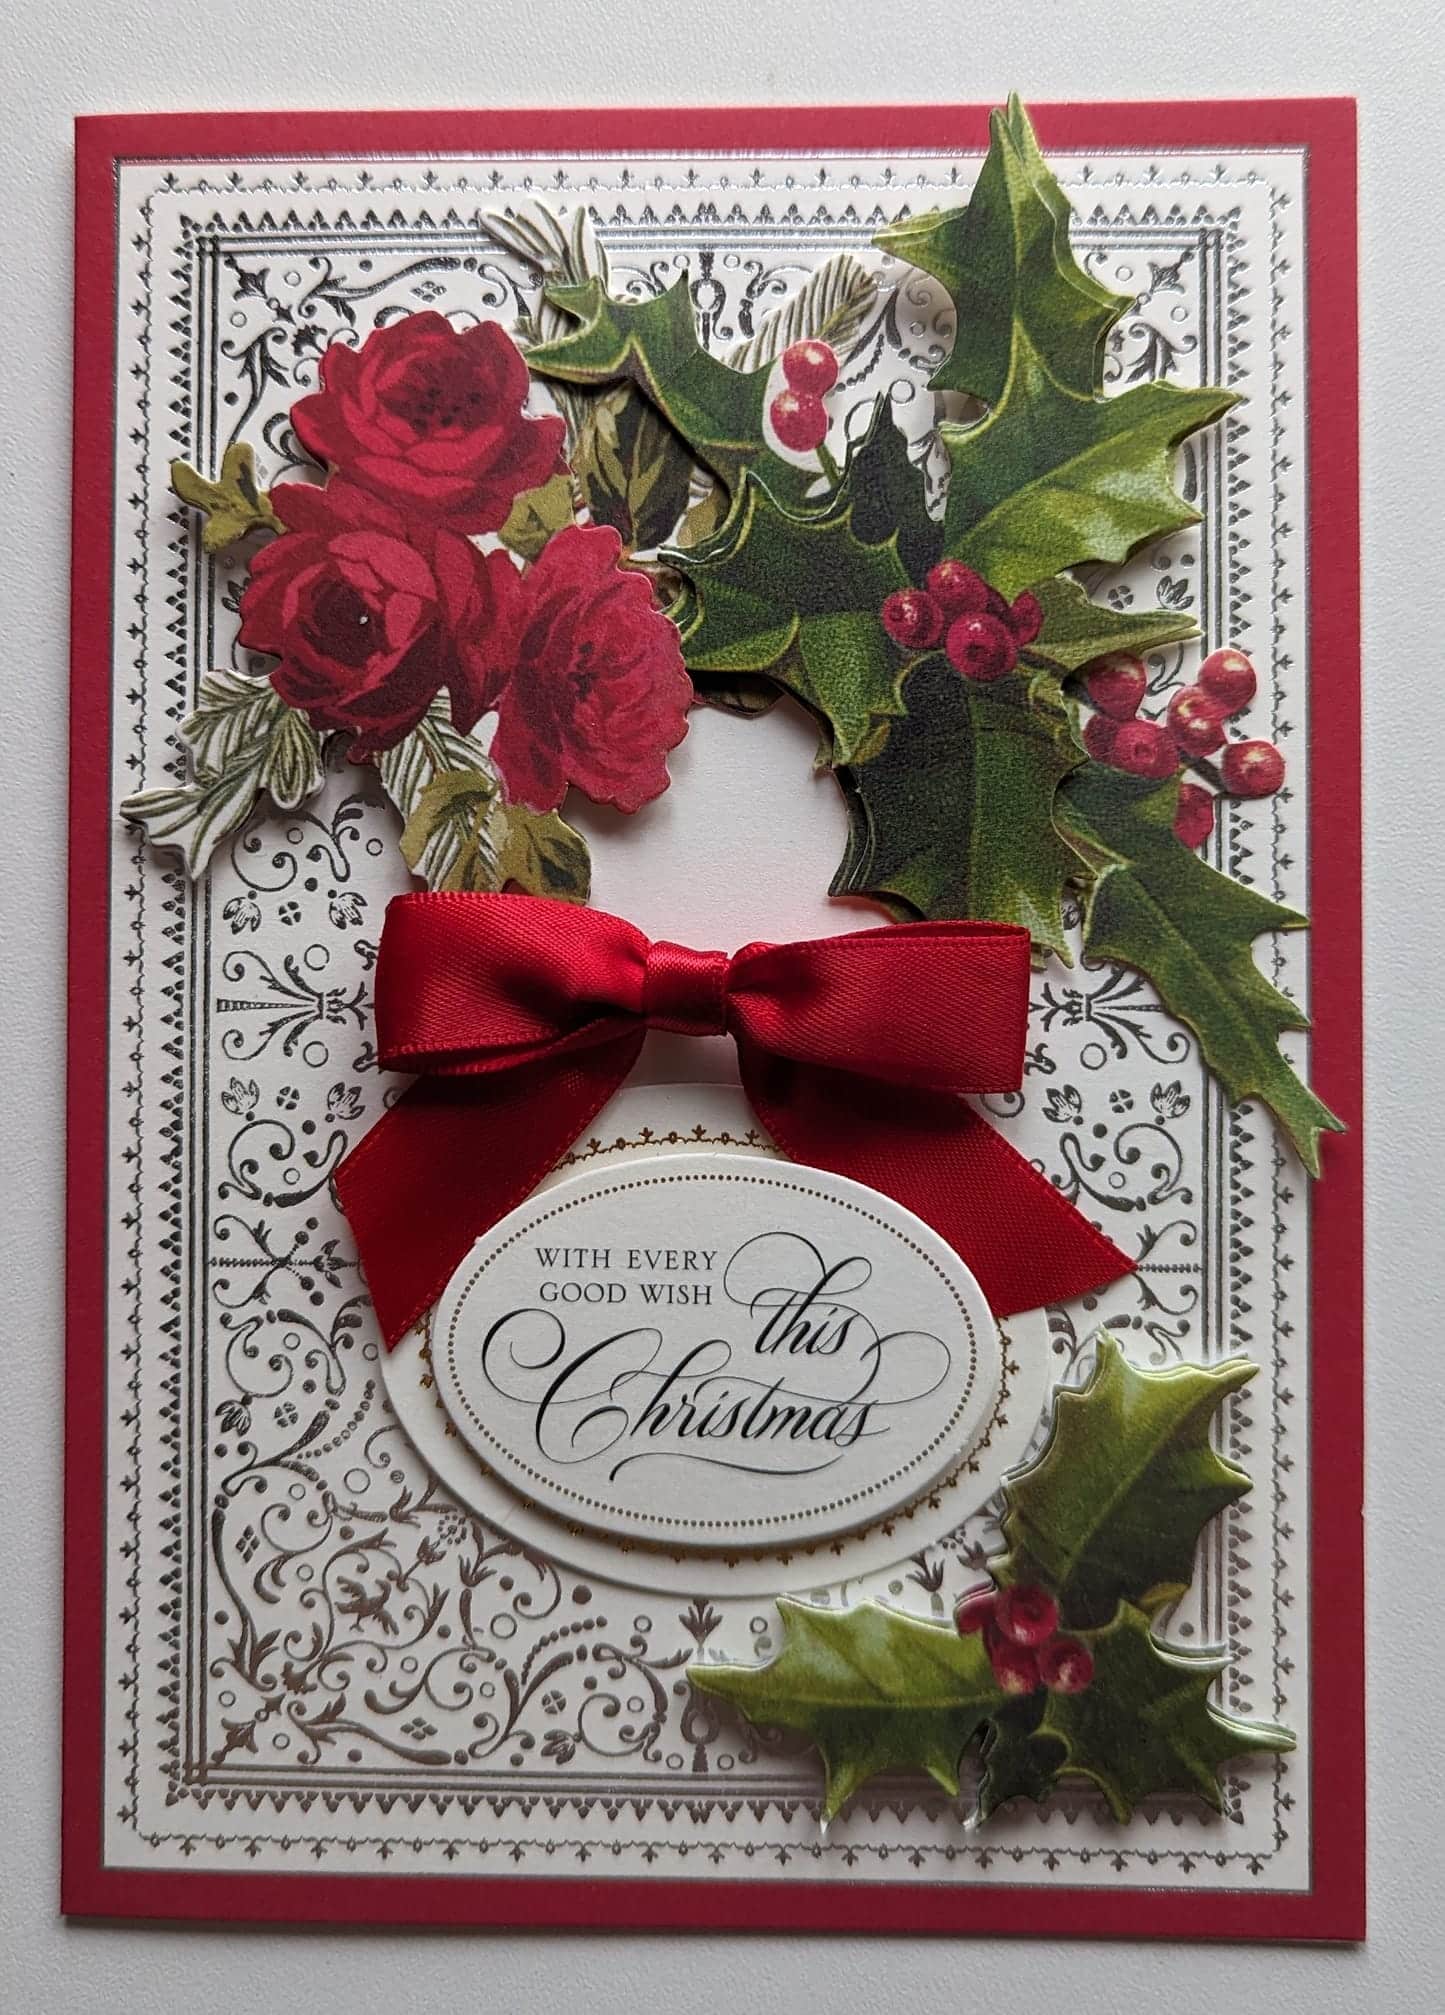 A christmas card with red roses and holly.